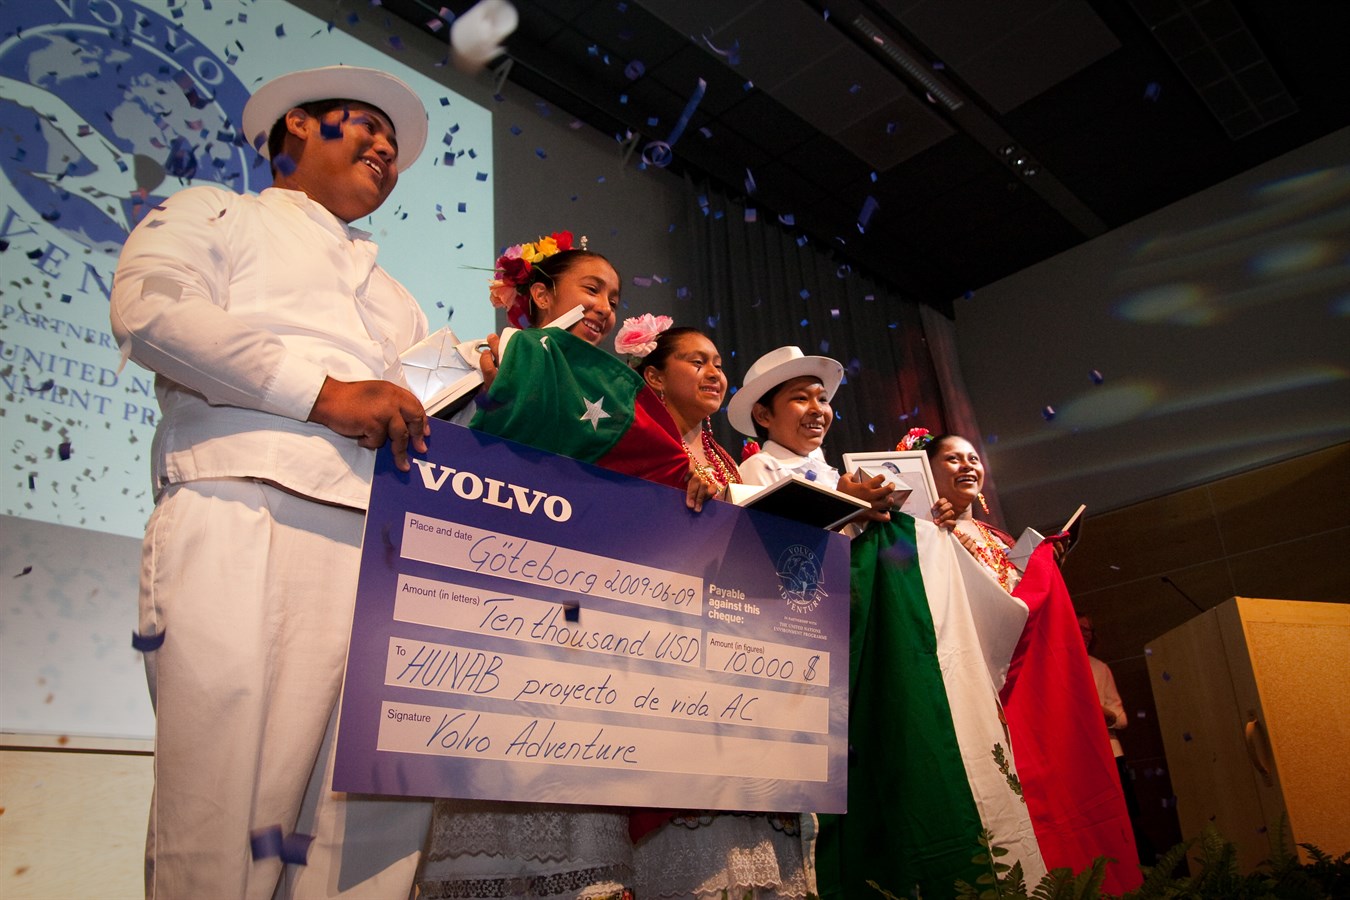 Volvo Adventure 2009 - The Winning team from Mexico